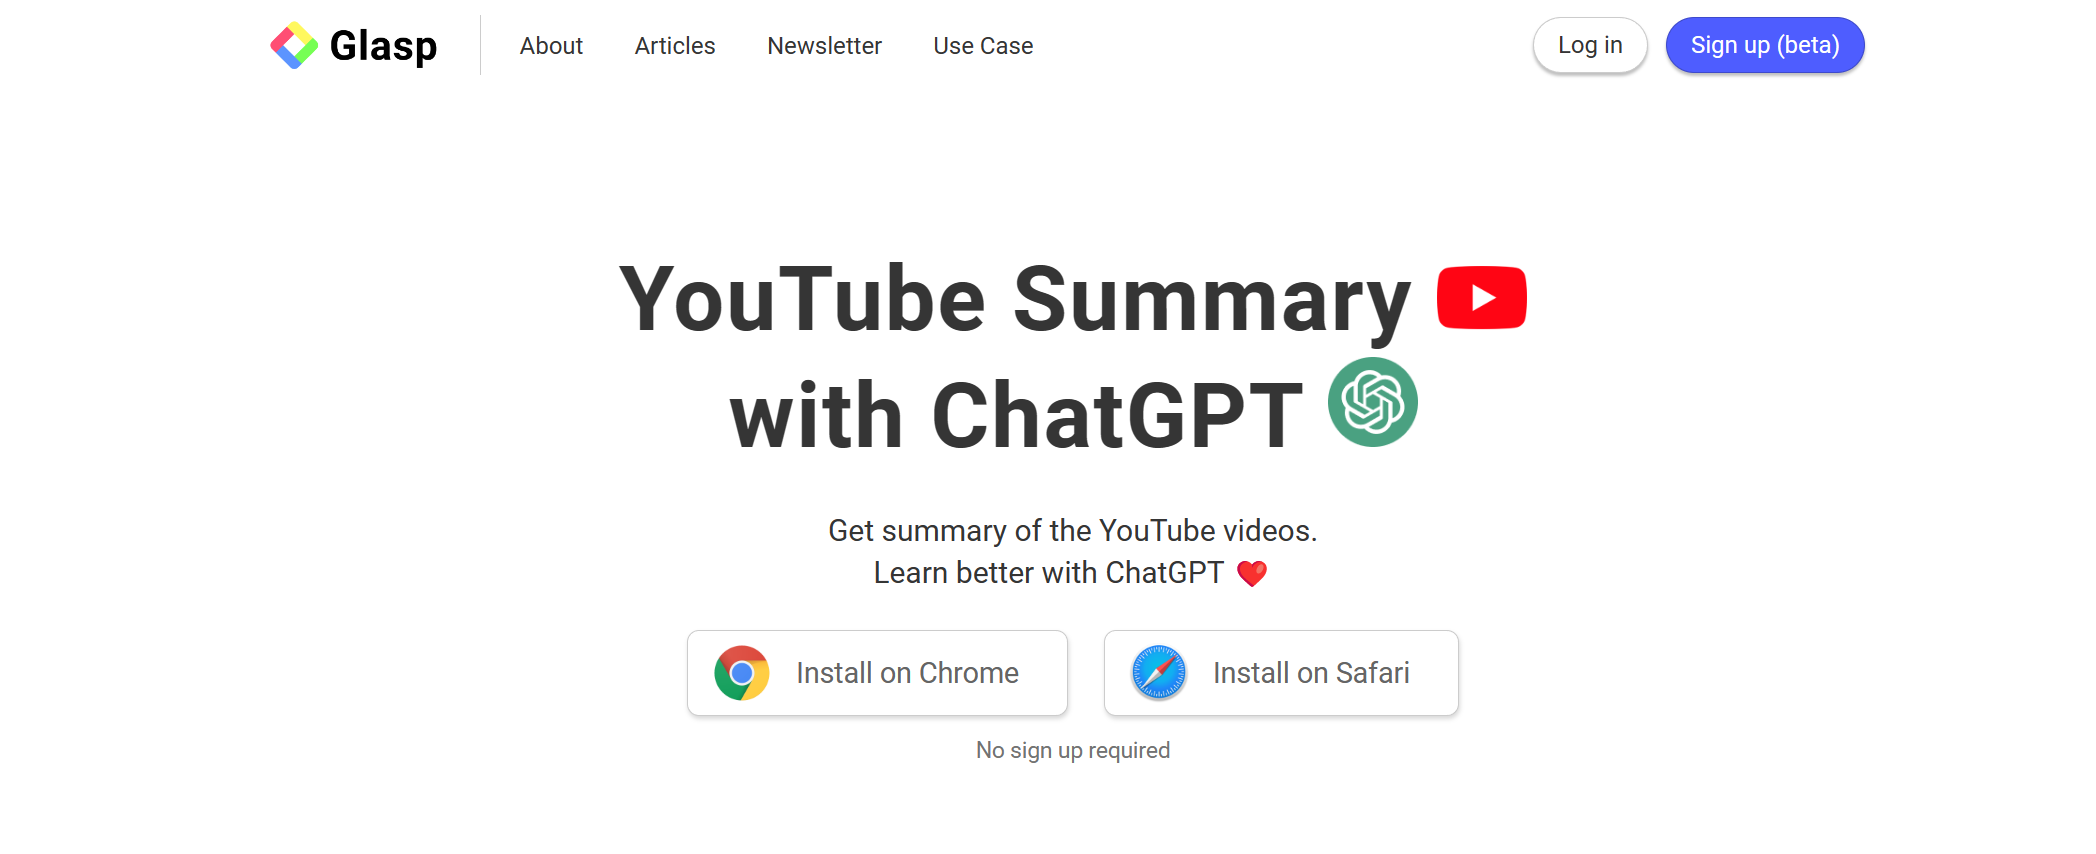 Glasp is a potential ChatGPT alternative that specializes in summarizing YouTube videos